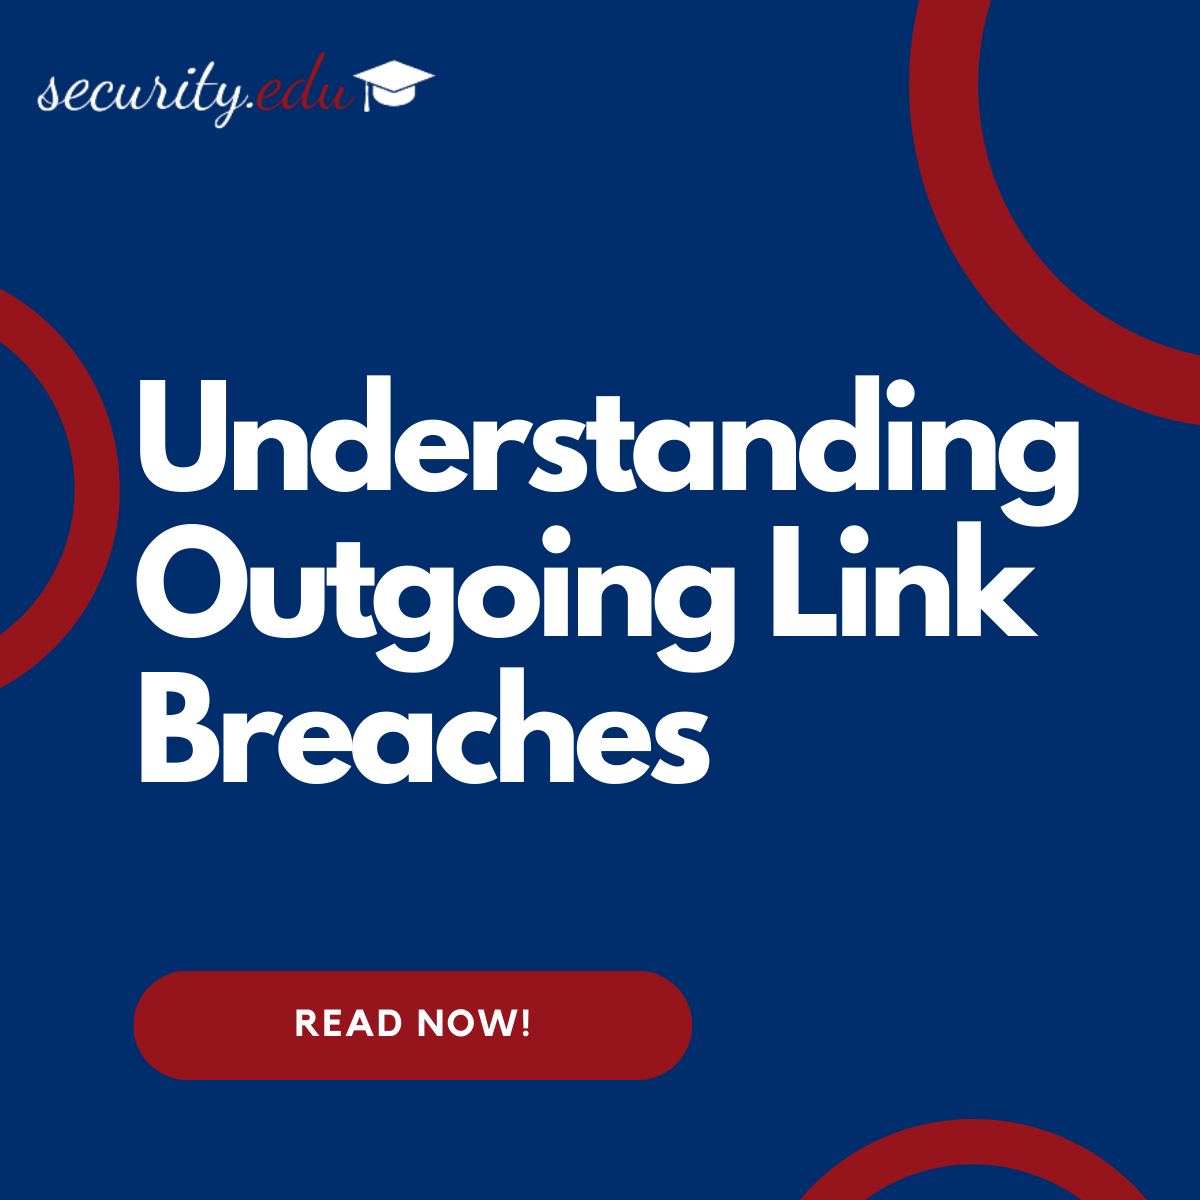 Featured image for “Understanding Outgoing Link Breaches”